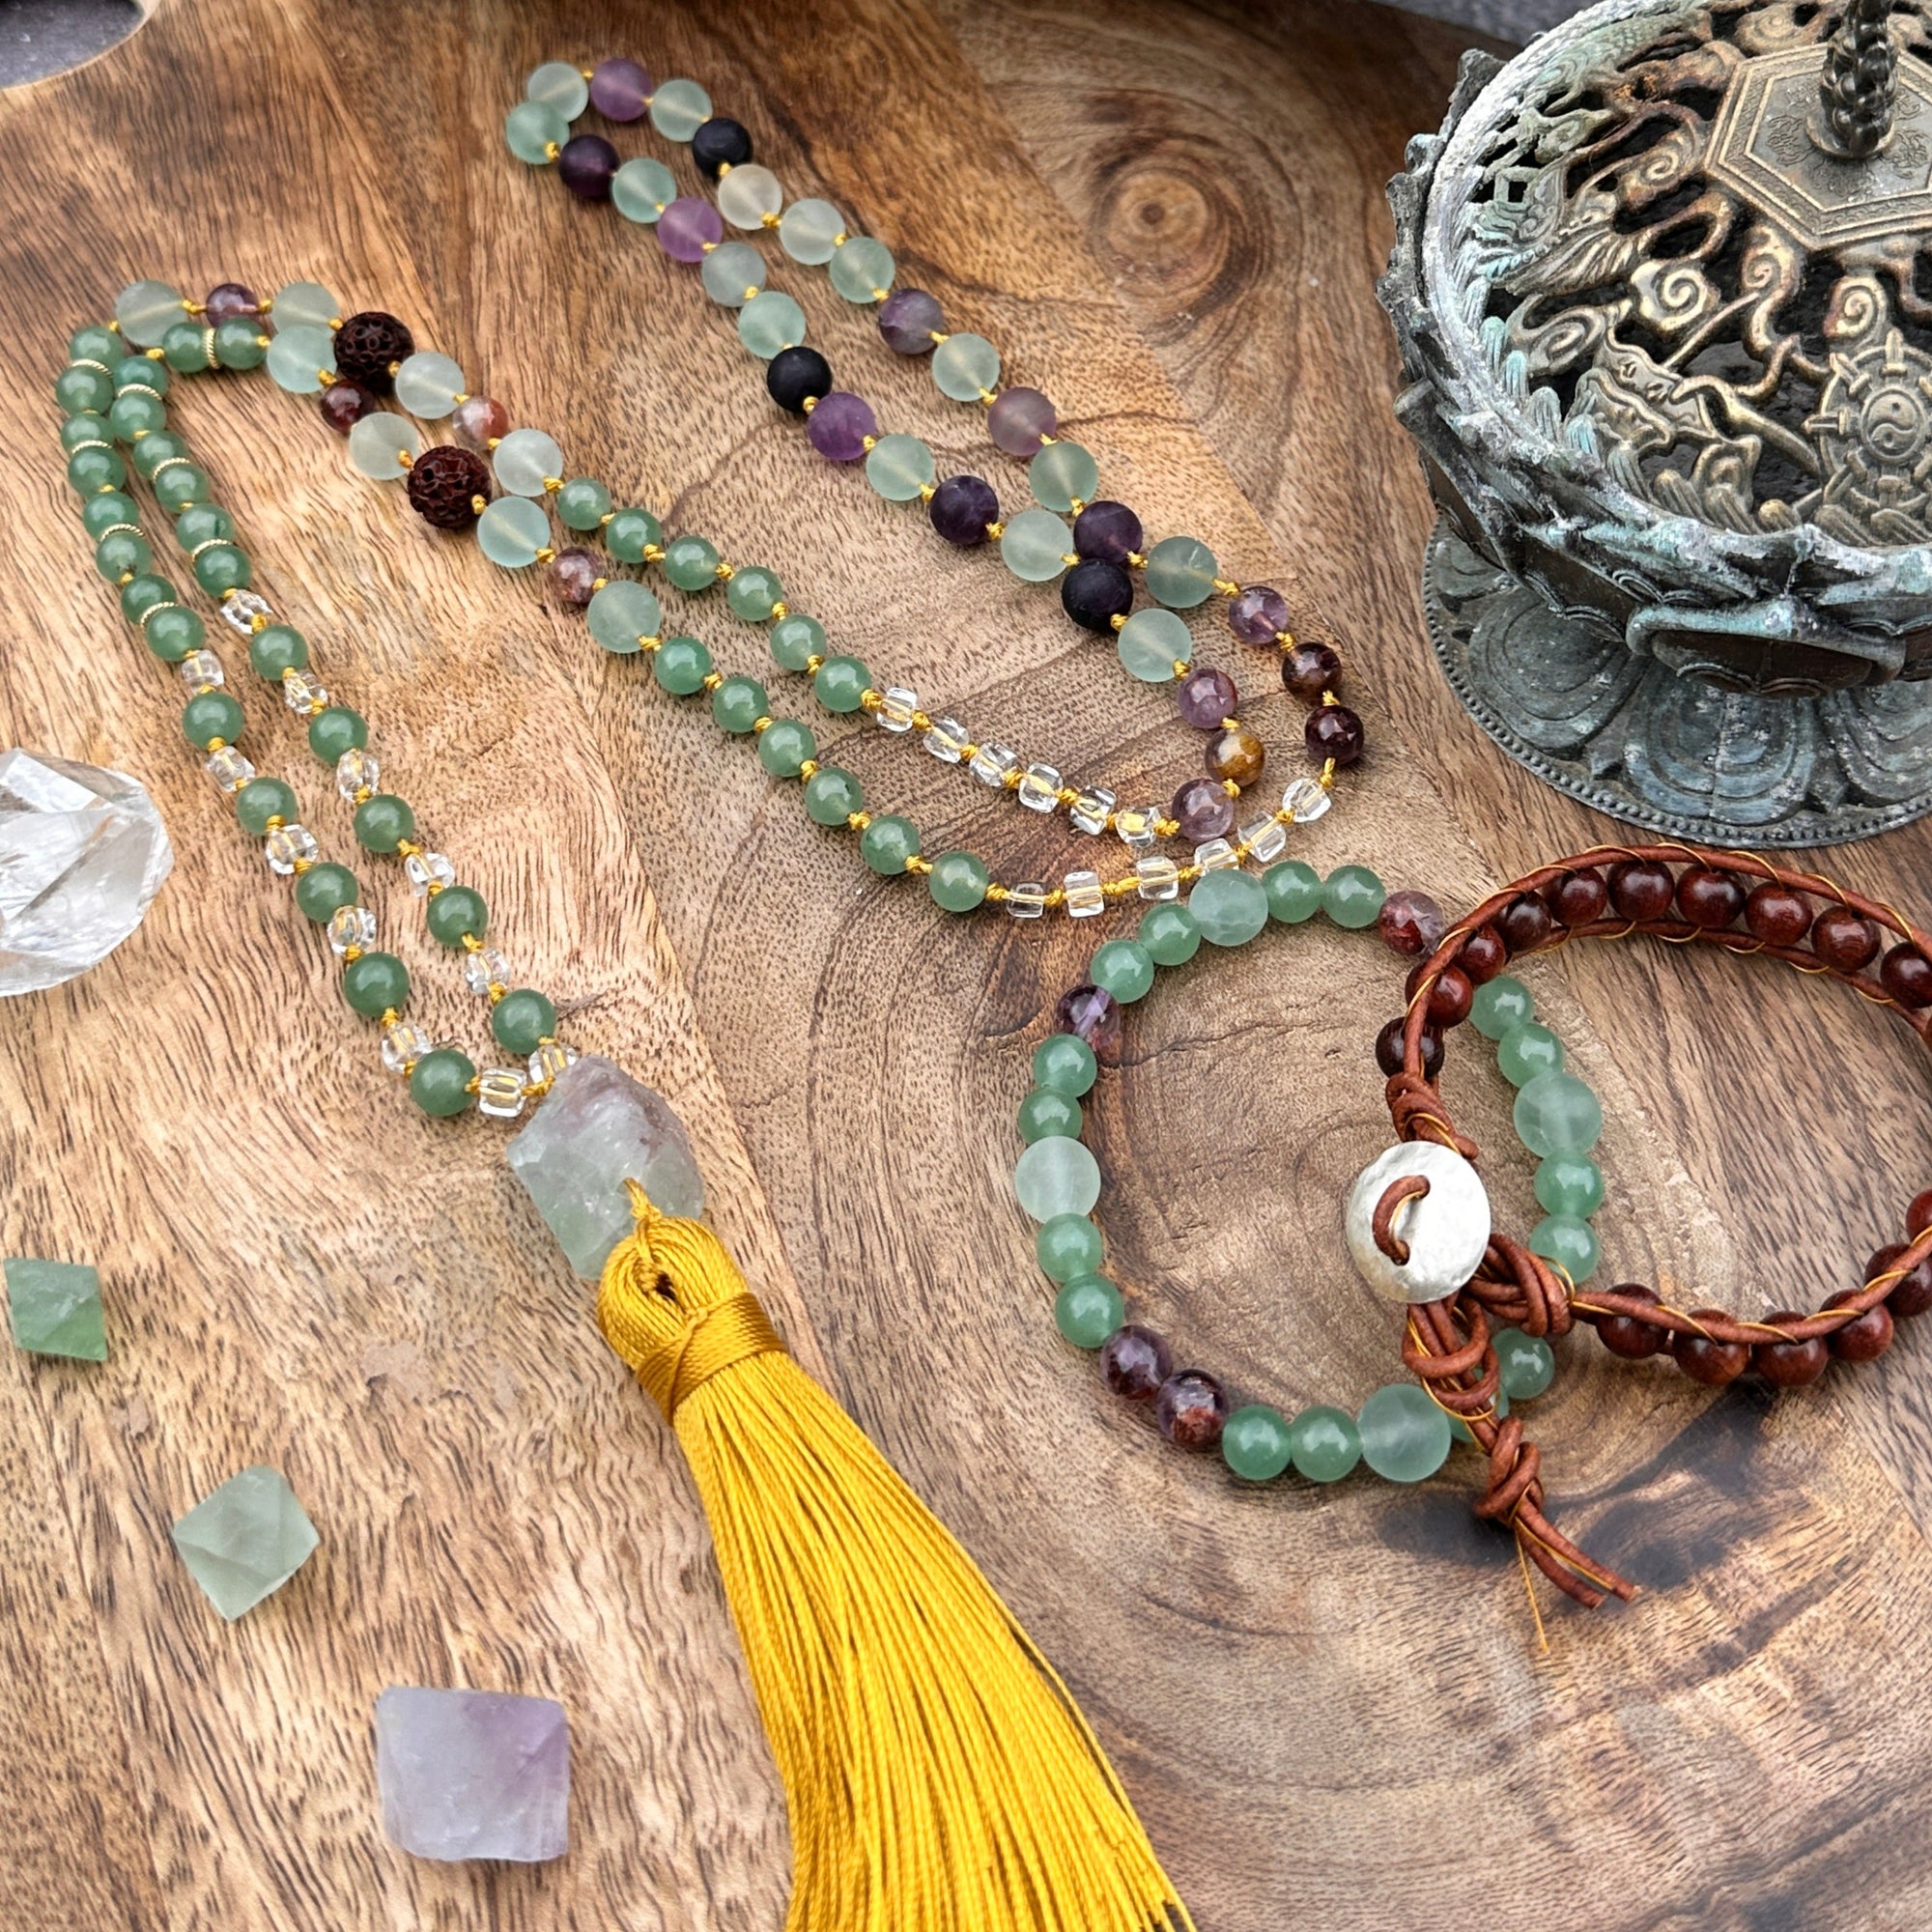 Handcrafted mala and brcelet set with vibrant spiritual-inspired beads